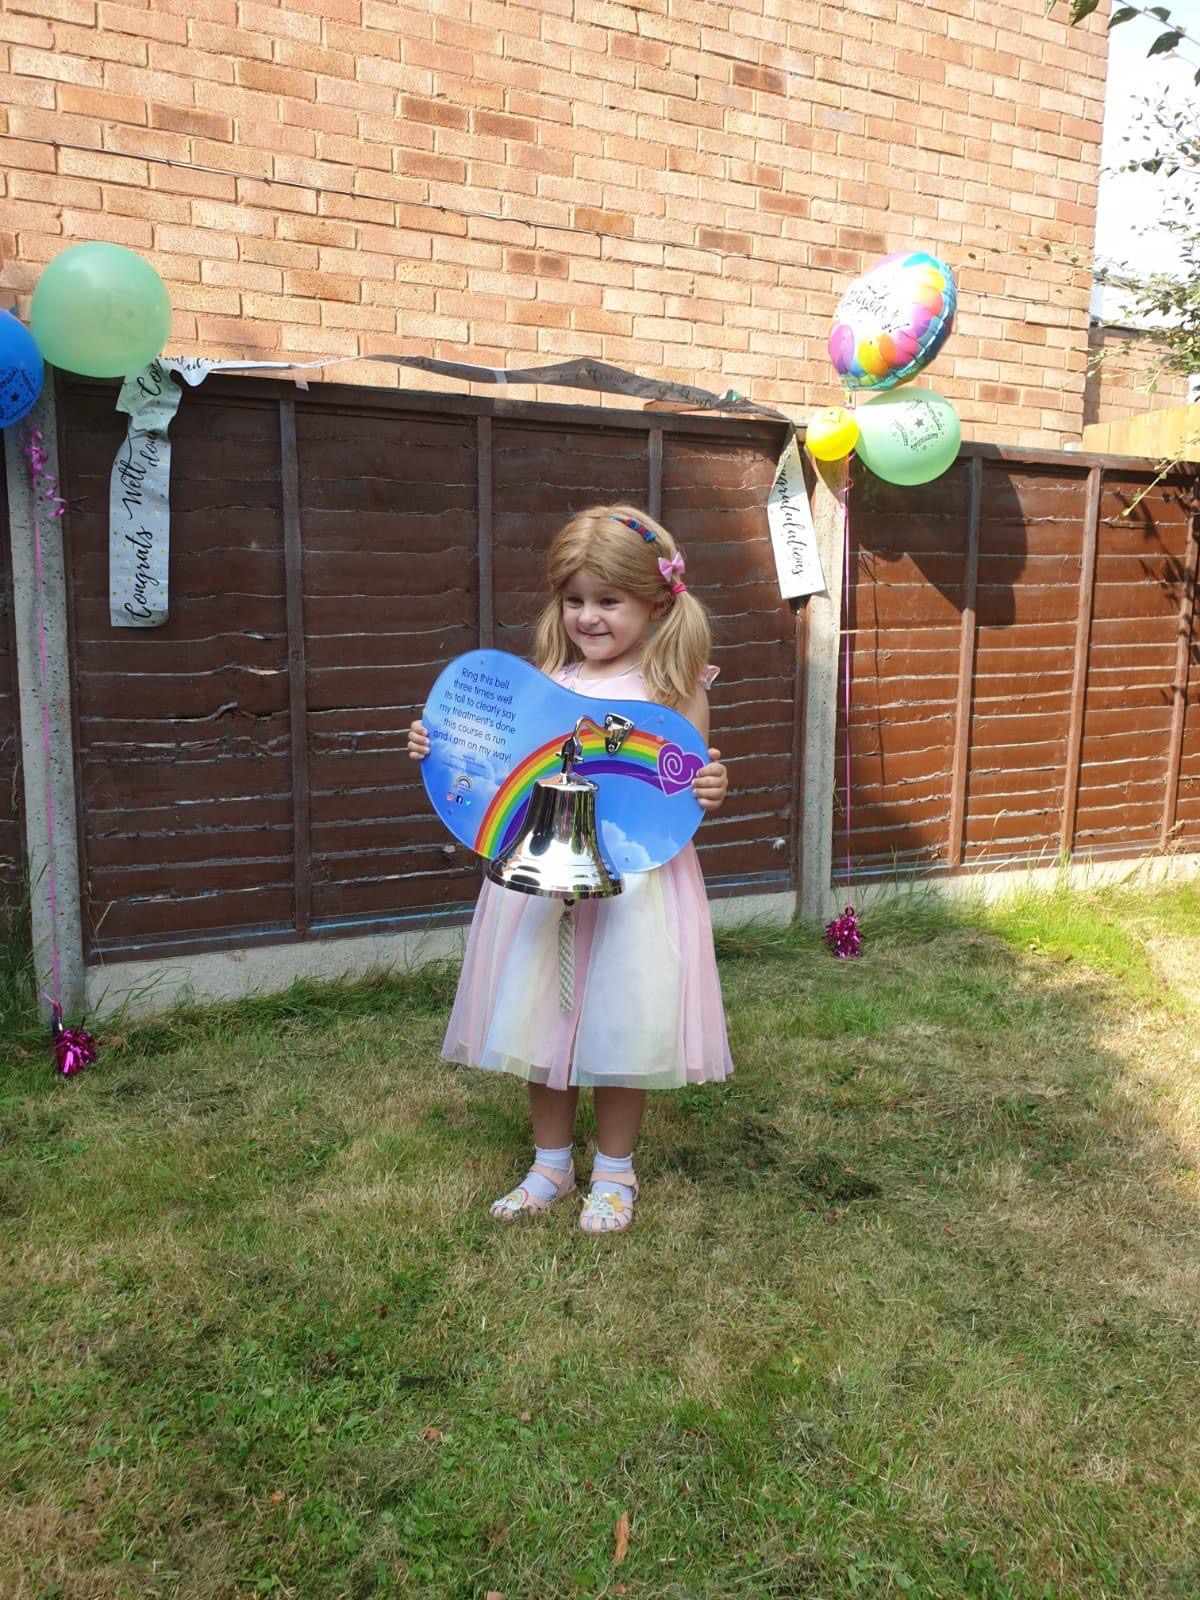 NEWS | Brave Oliwia rings end of treatment bell in her Nan’s garden